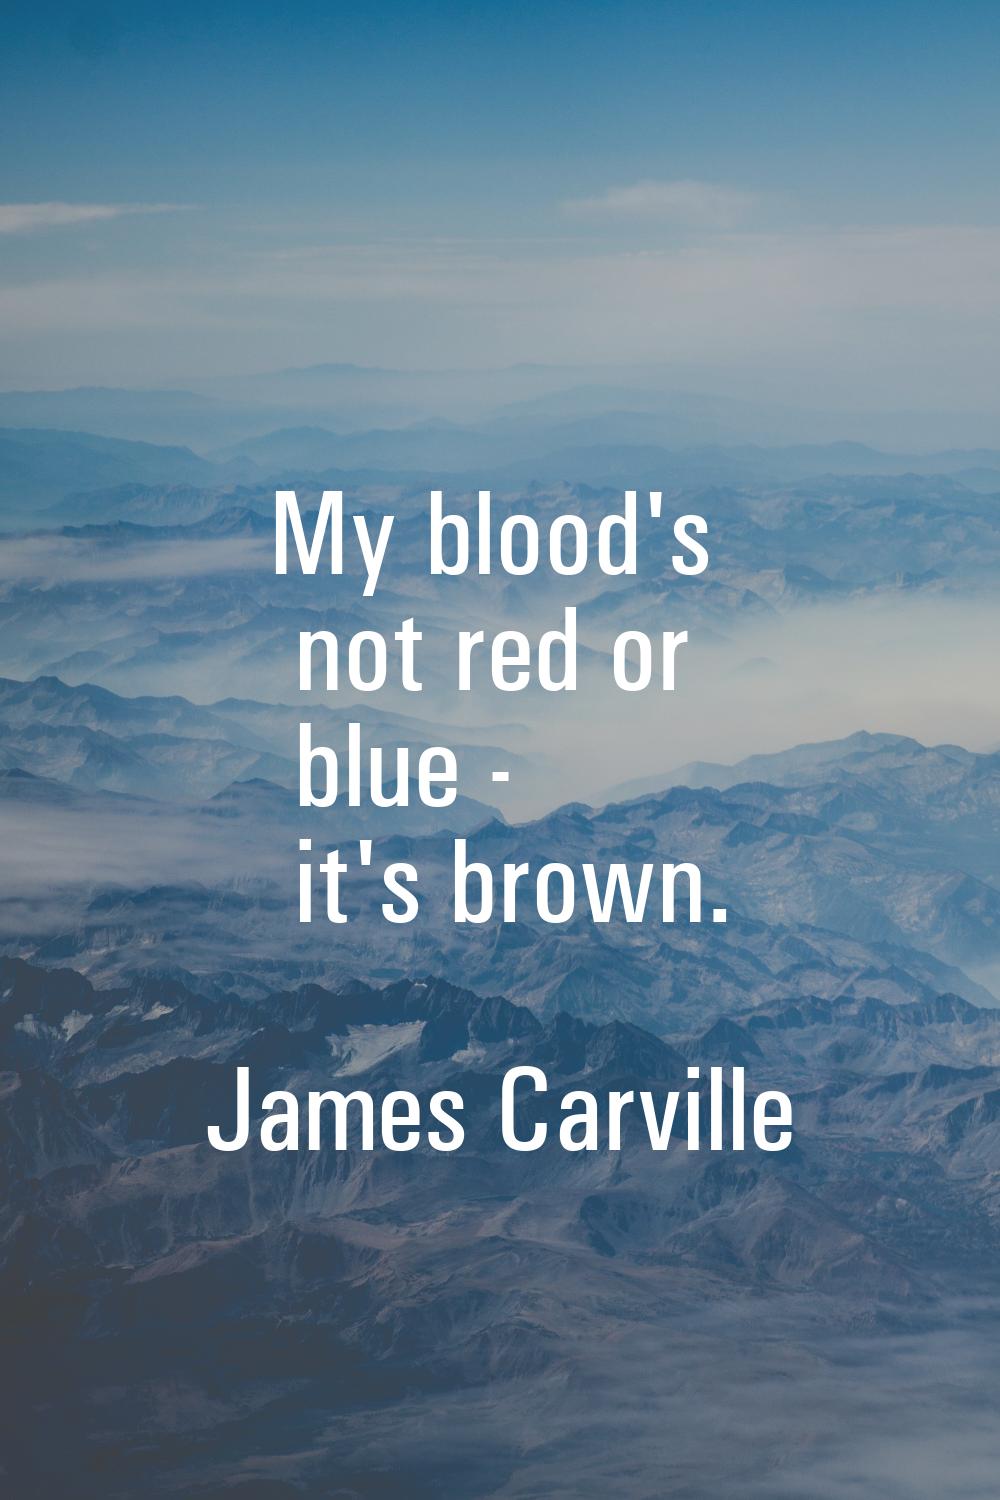 My blood's not red or blue - it's brown.